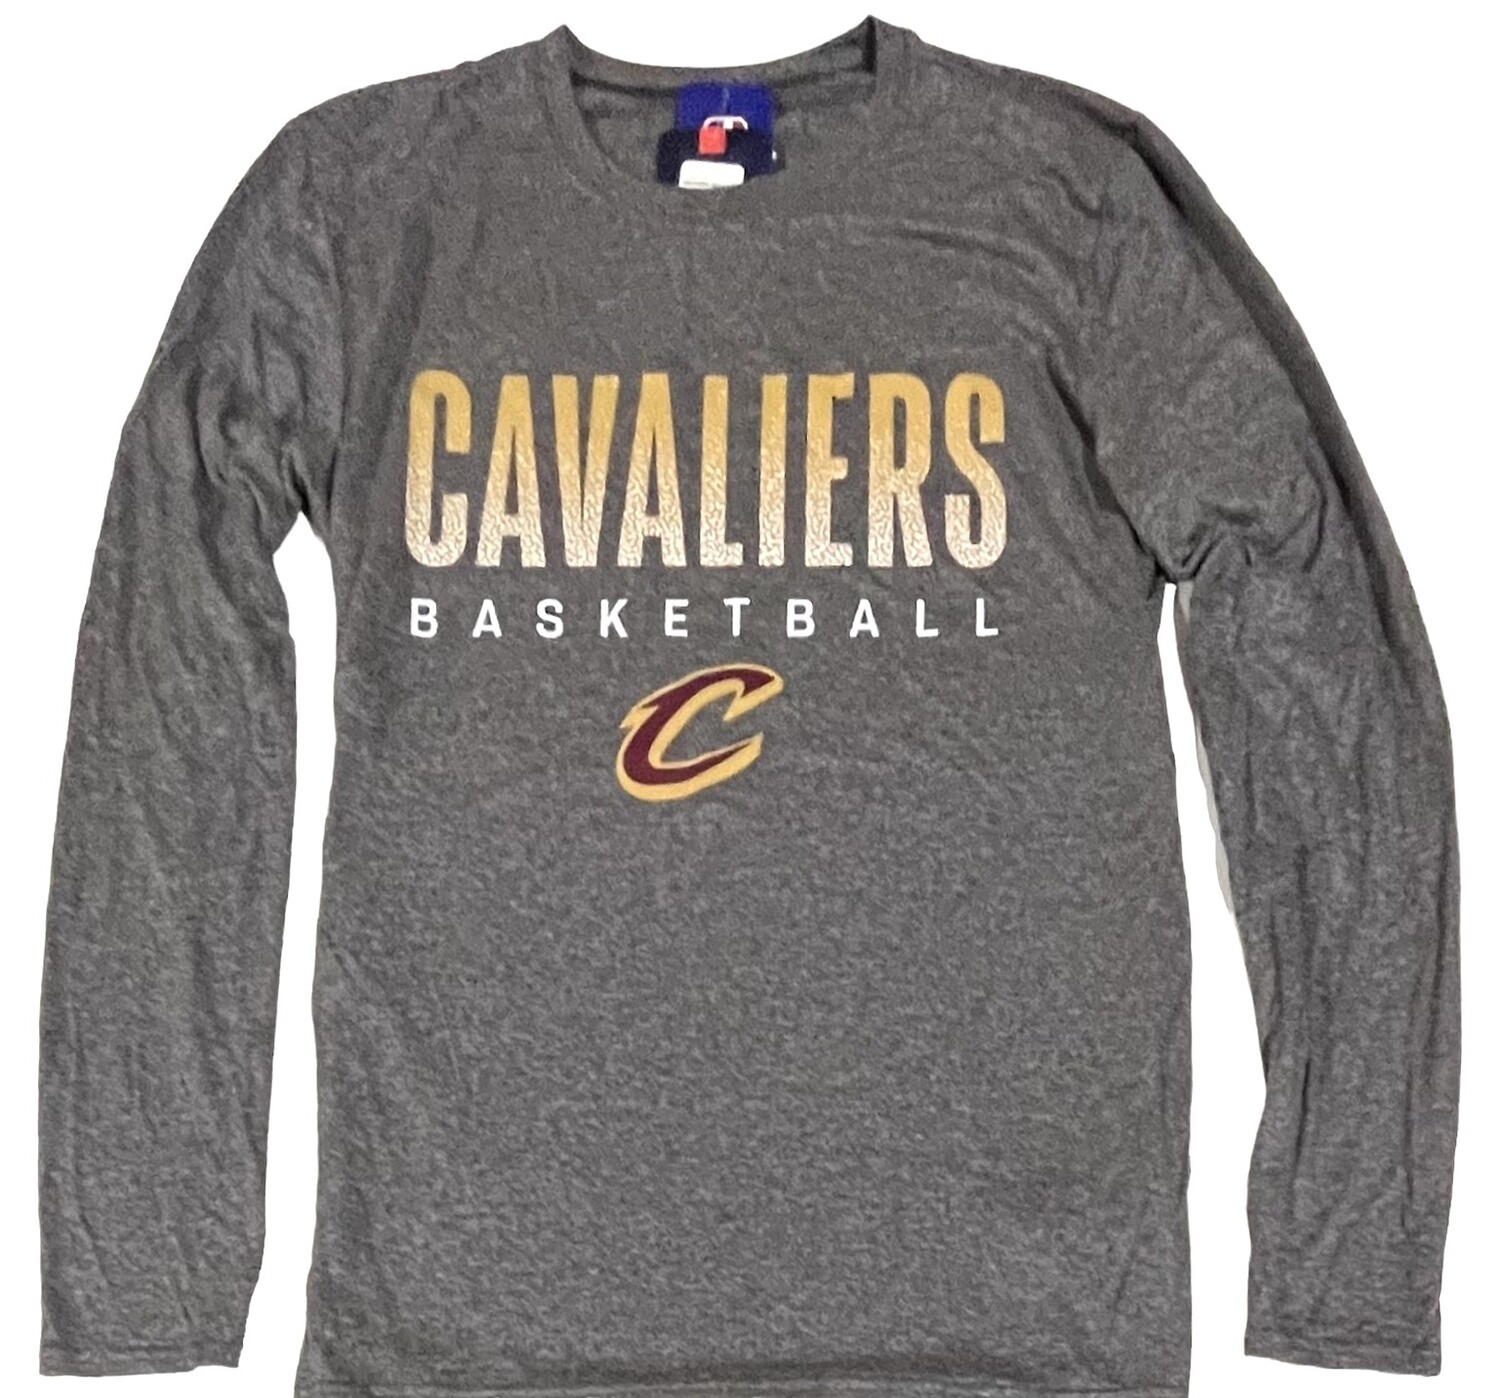 Cleveland Cavaliers Long Sleeve T-Shirts, Cavaliers Long-Sleeved